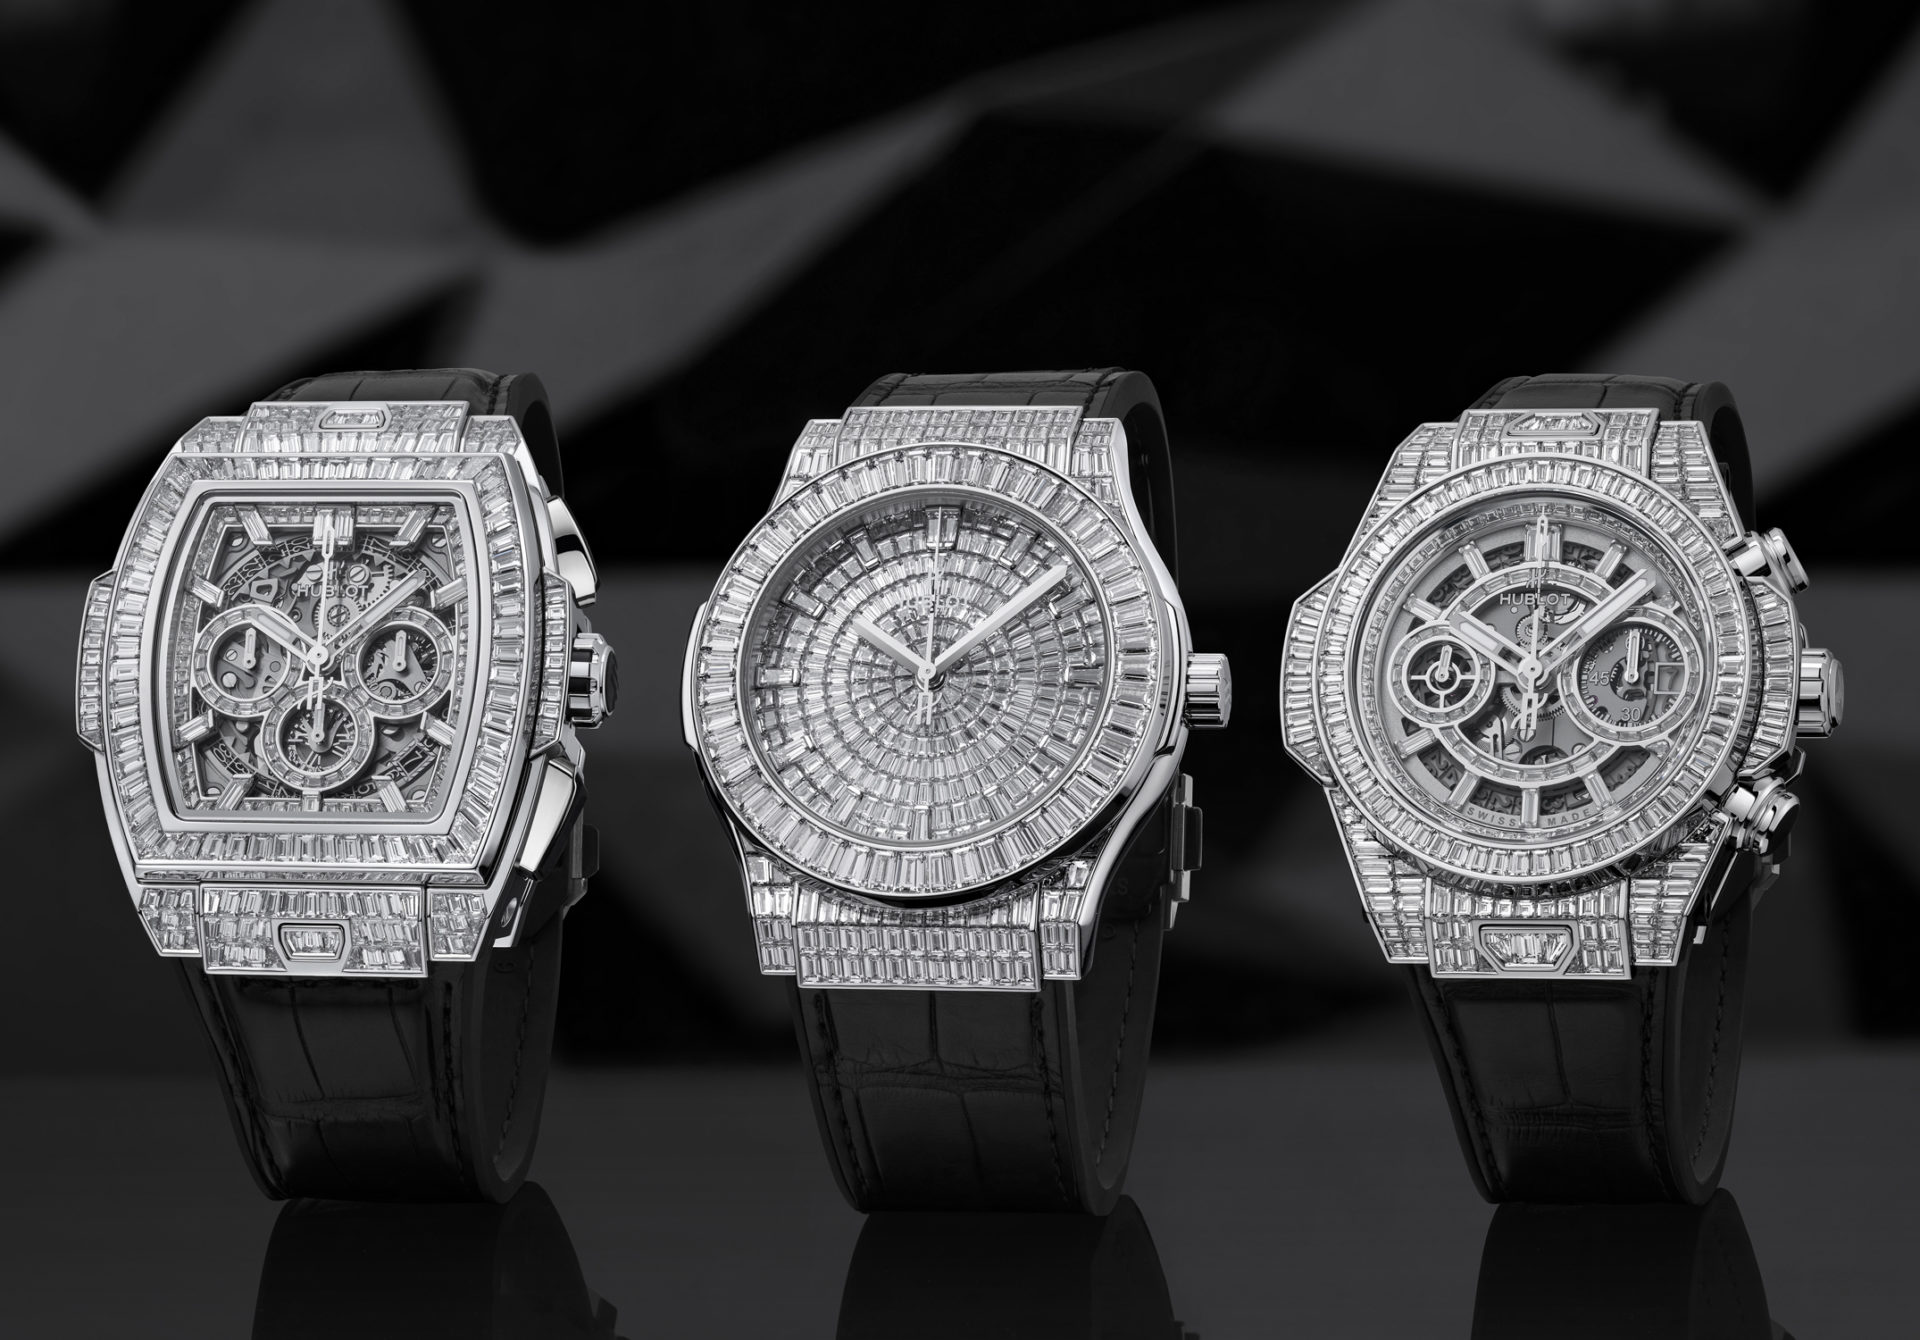 Hublot high jewelry collection